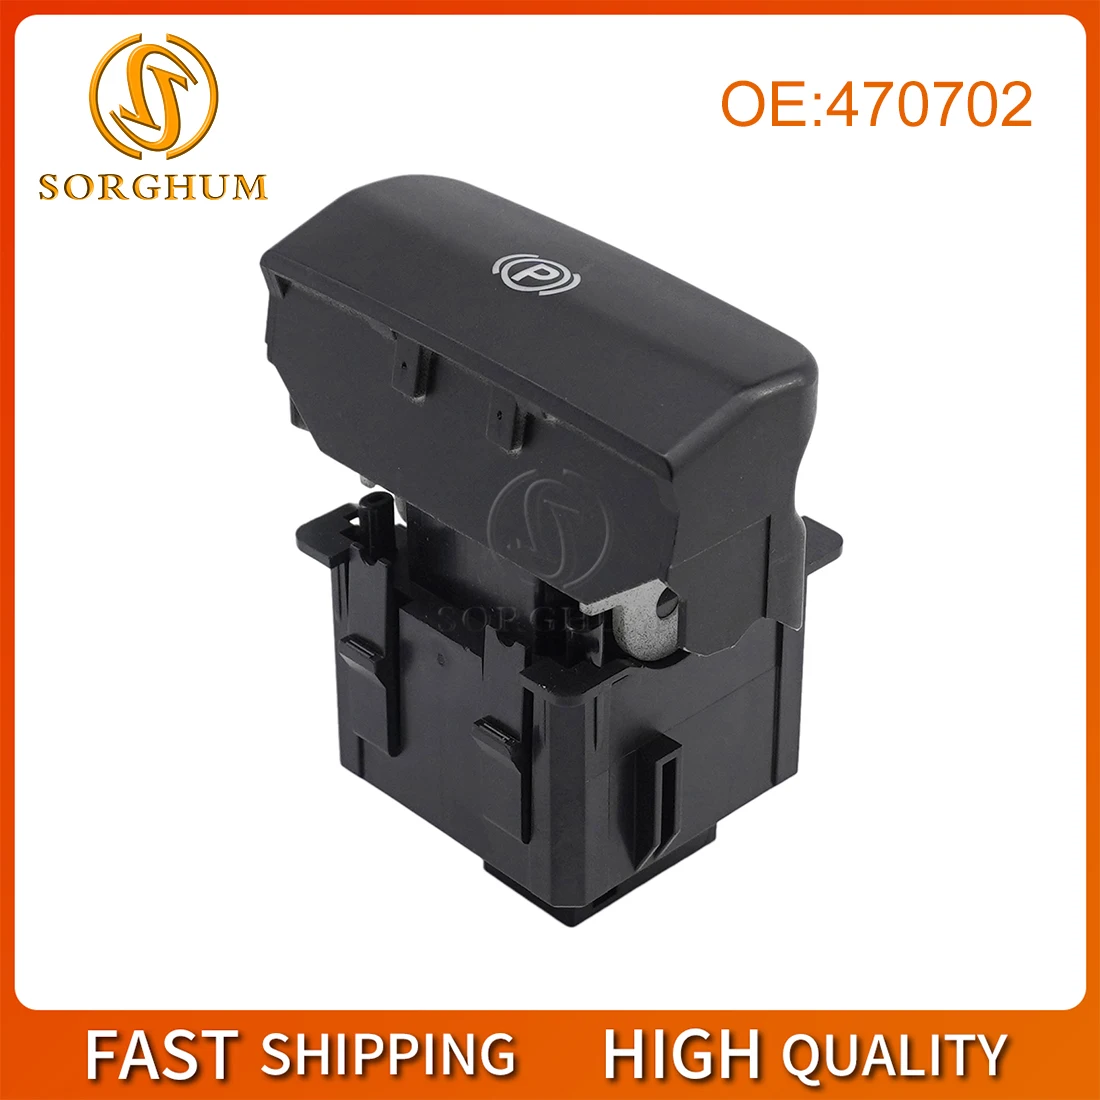 

Sorghum 470702 7 Pins Parking Brake Switch Electronic Handbrake Button For Peugeot 5008 308 3008 CC SW DS5 DS6 607 470706 470703